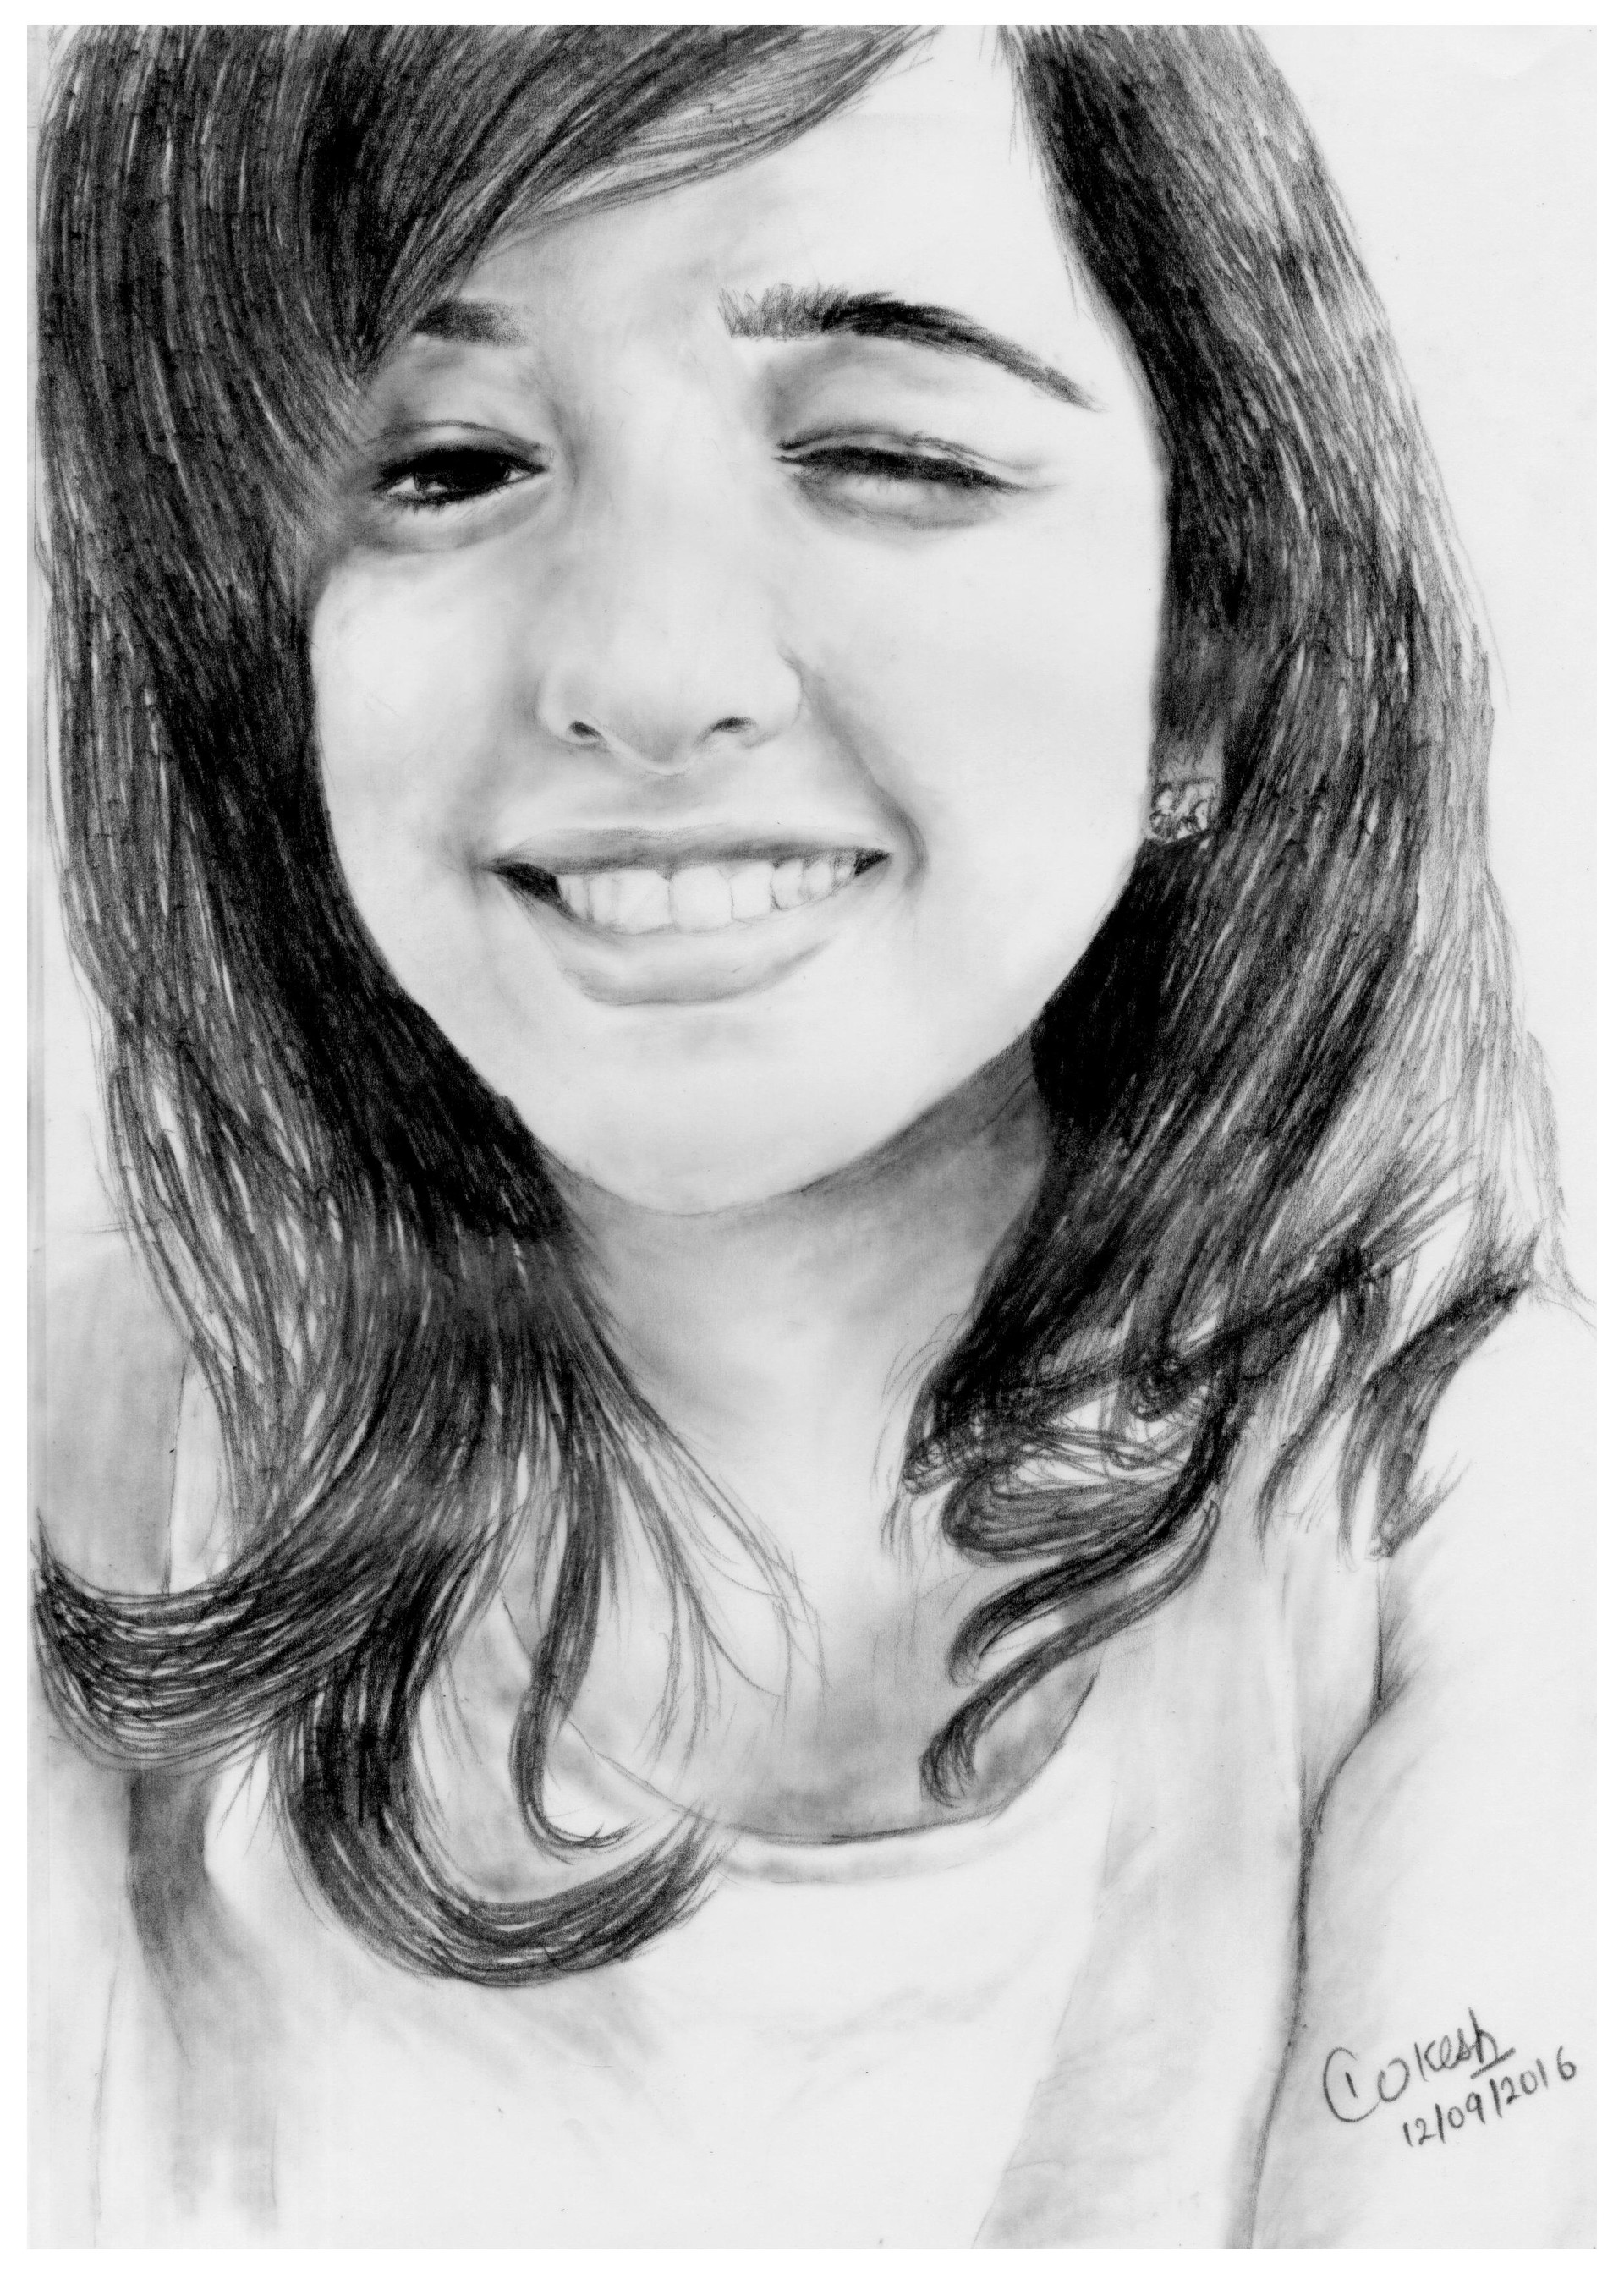 Your sketches INDIA - Pencil sketch of Shirley Setia (cutest person on  instagram) #shirleysetia #shirley #teamshirley #teamshirleysetia #youtuber  #love #cute #adorable #gorgeous #singer #i_hobbygraphy | Facebook